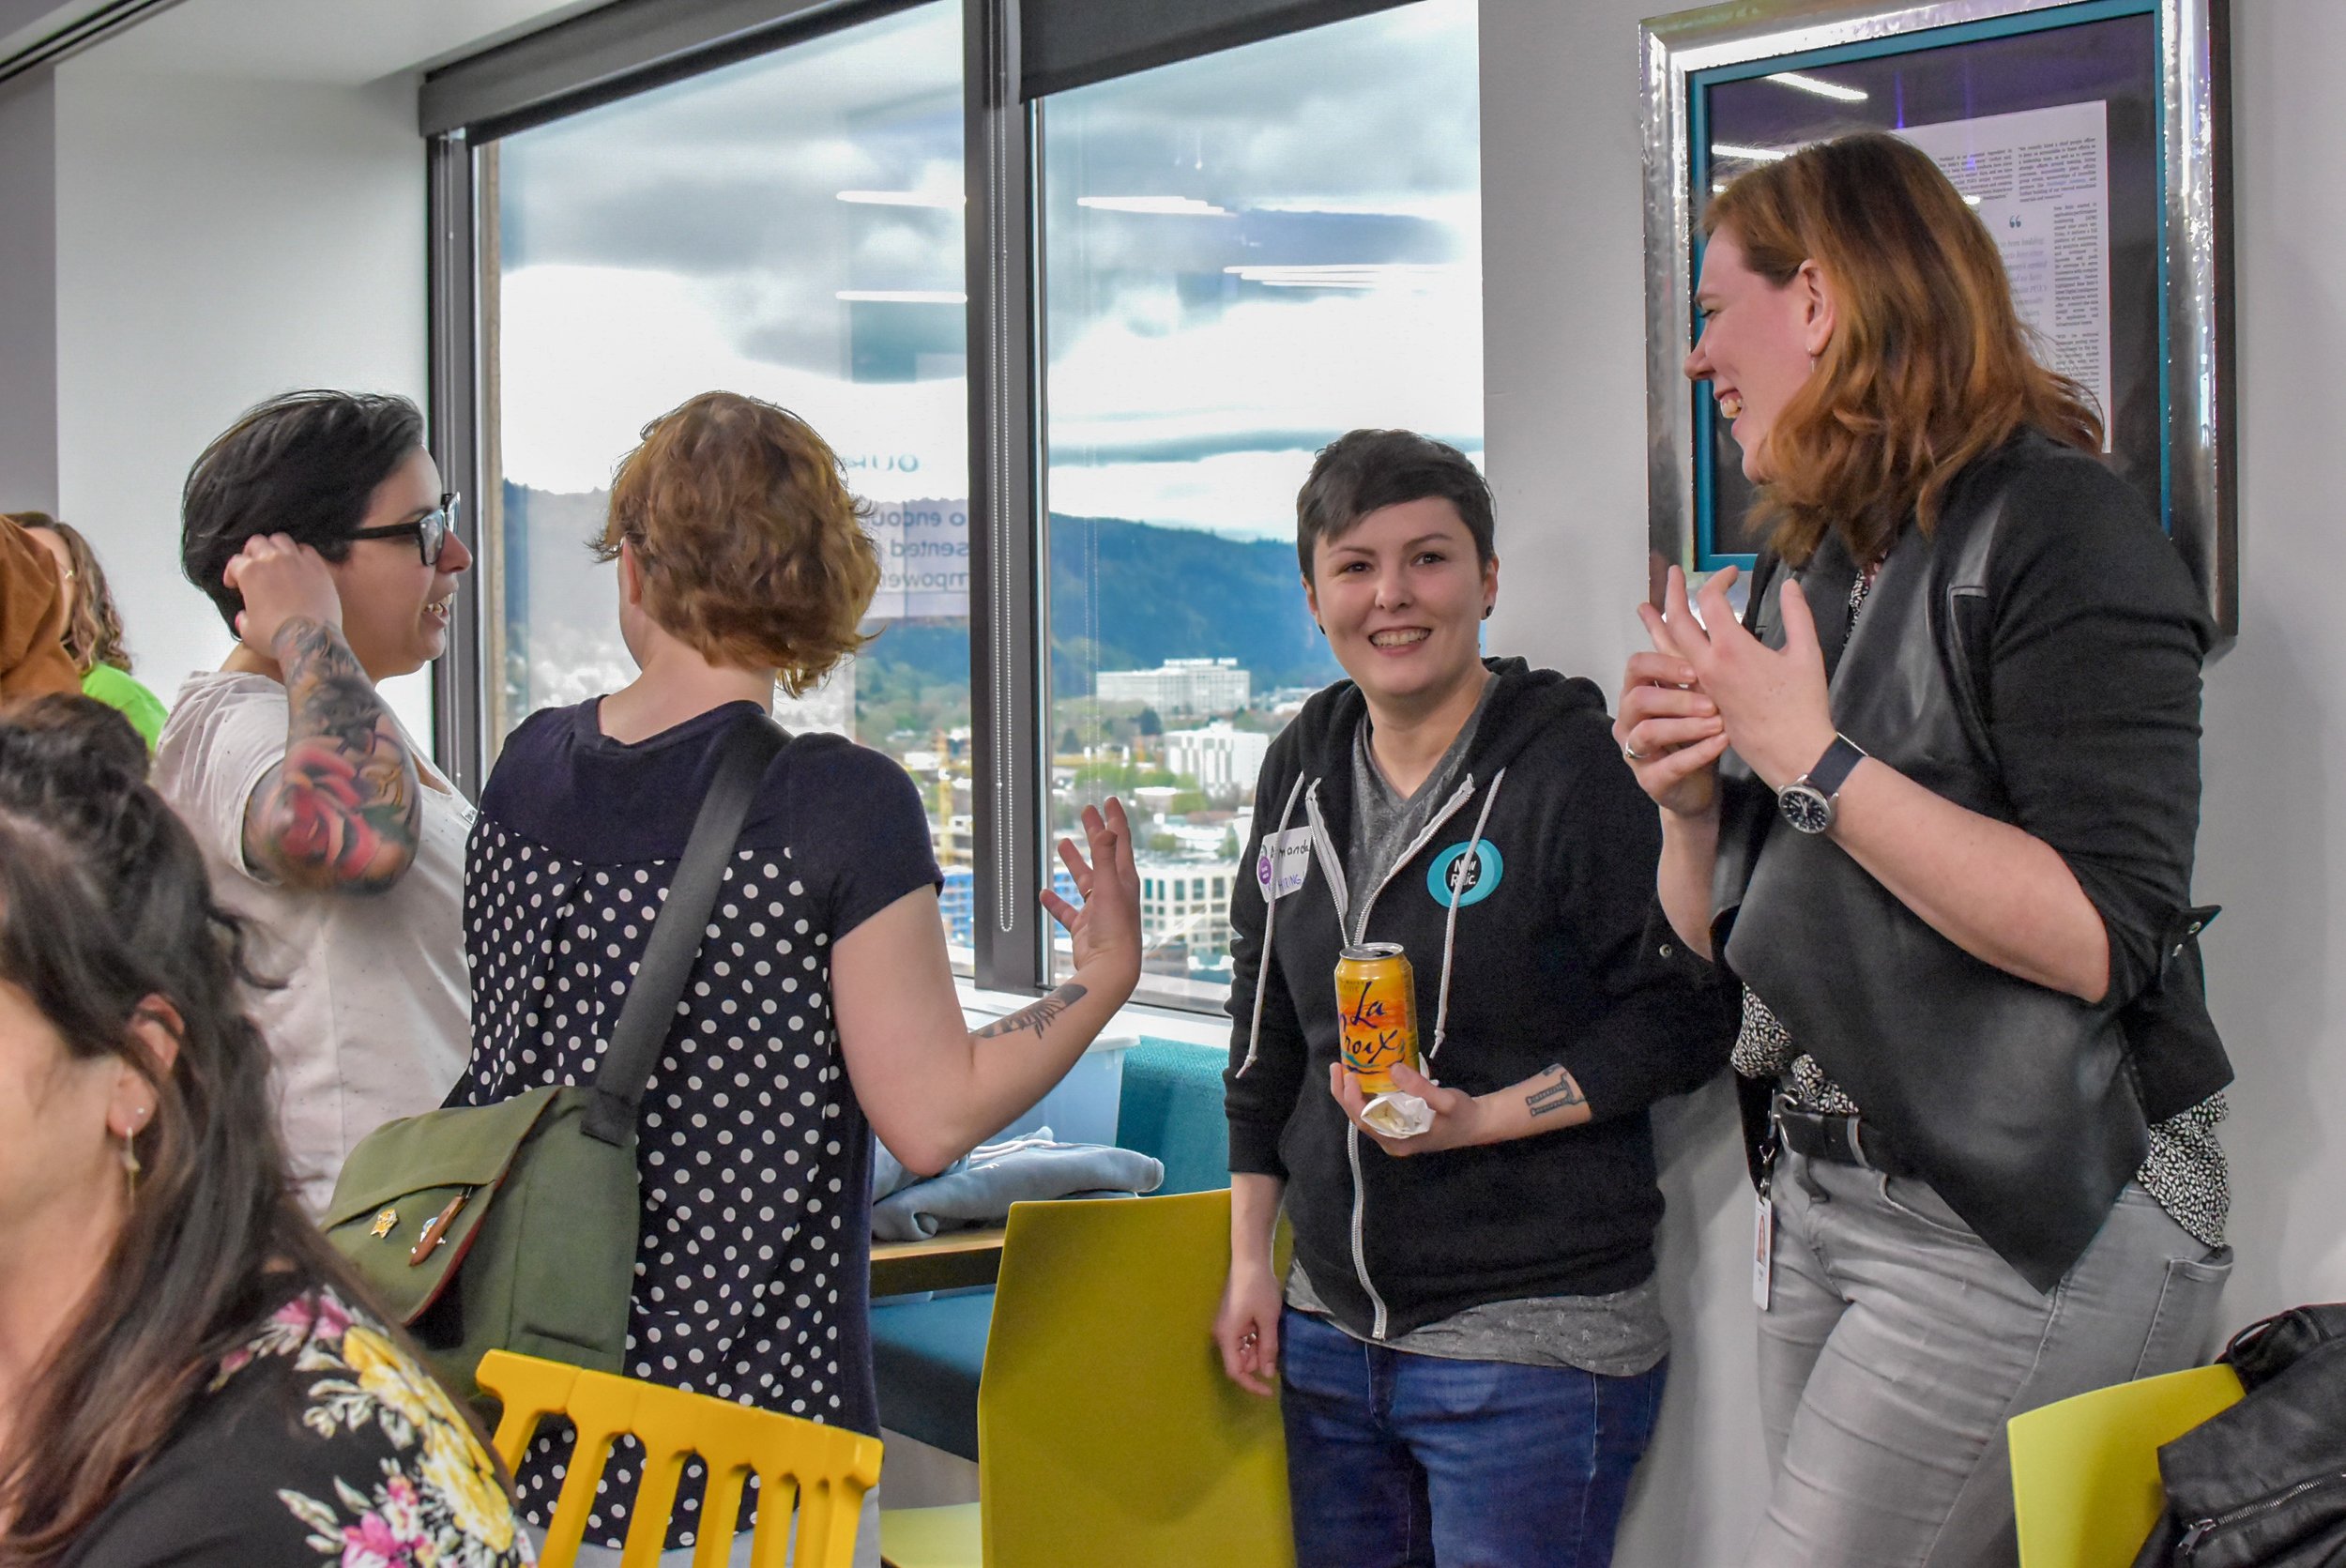 PDXWIT April Happy Hour @ New Relic, 4/16/19, Attendees mingle